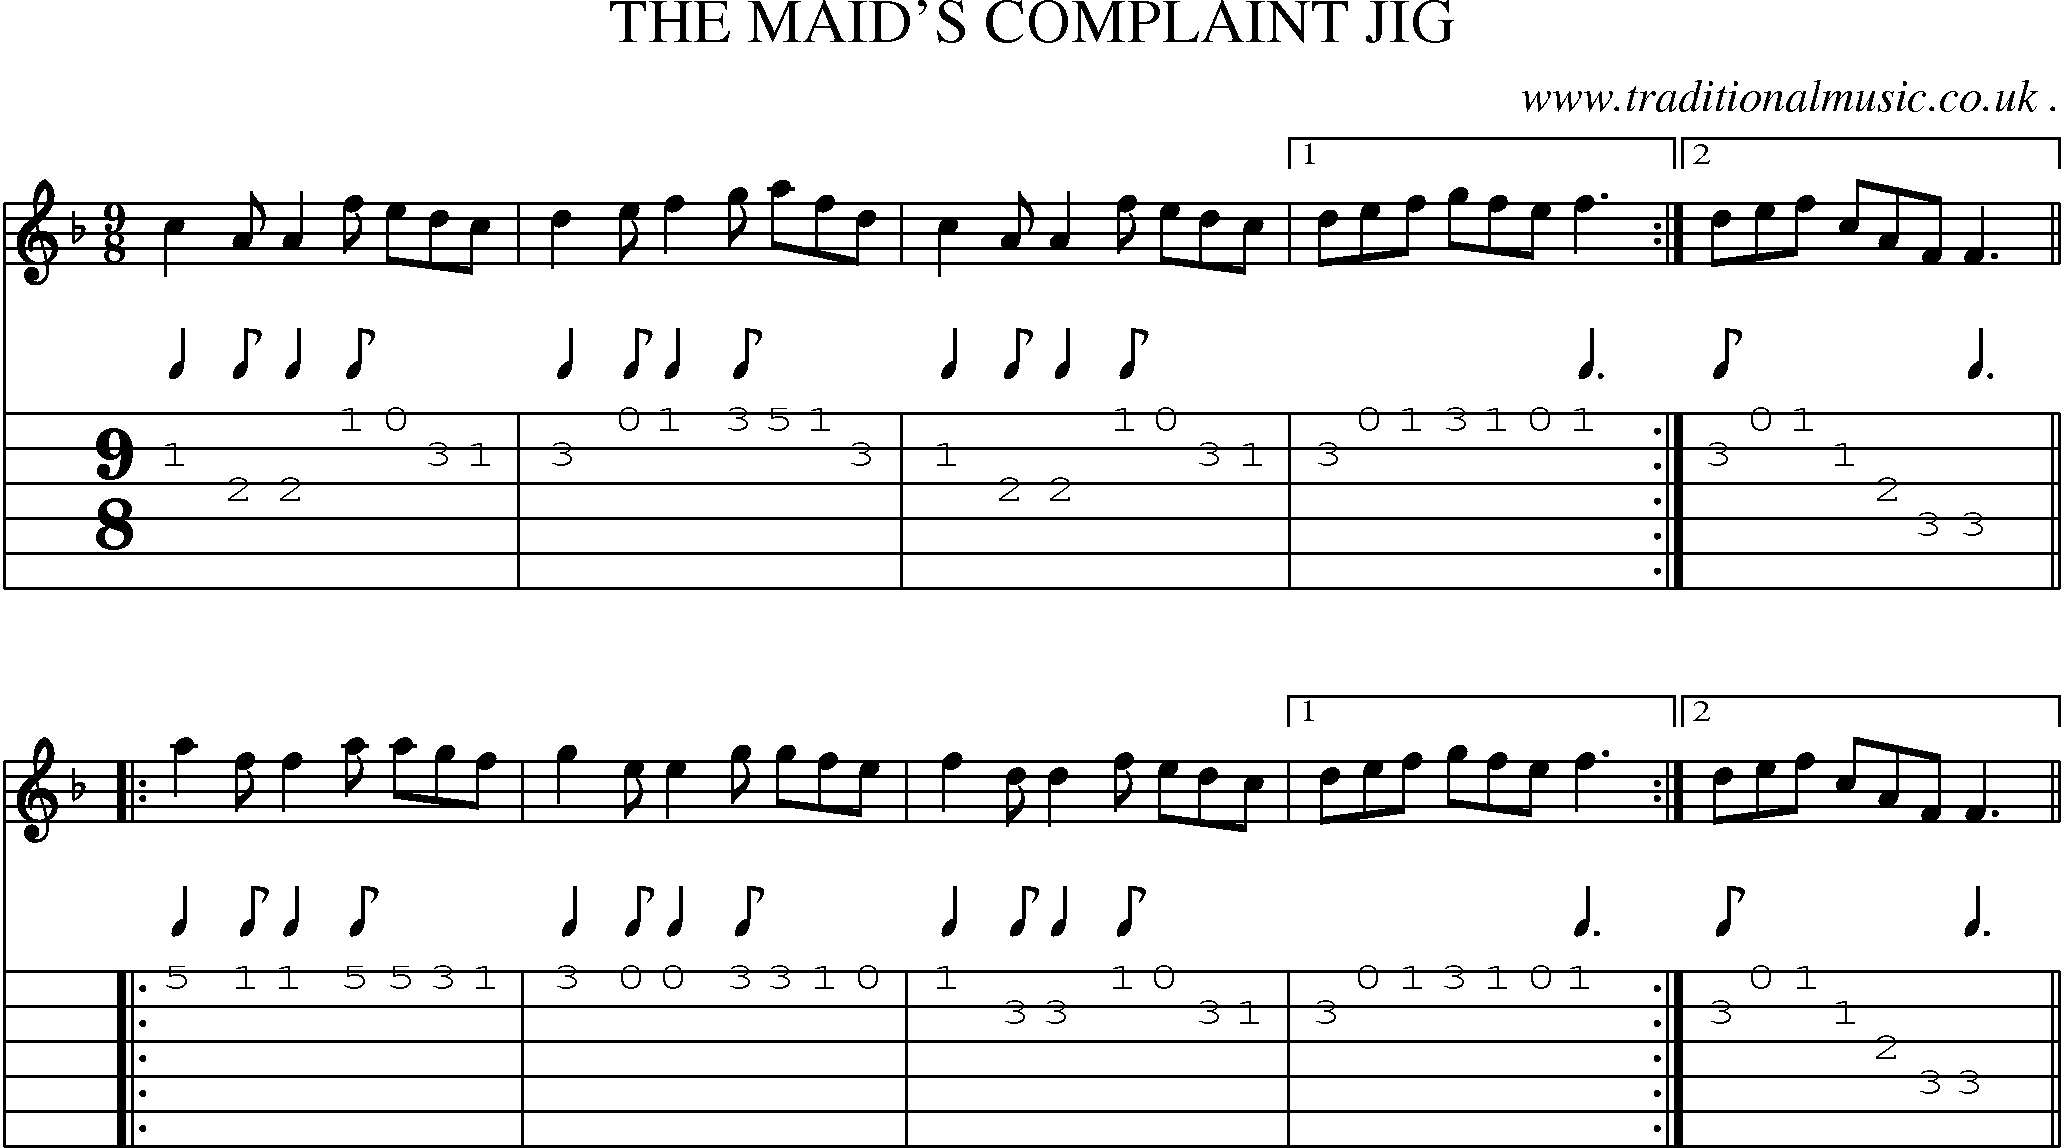 Sheet-Music and Guitar Tabs for The Maids Complaint Jig